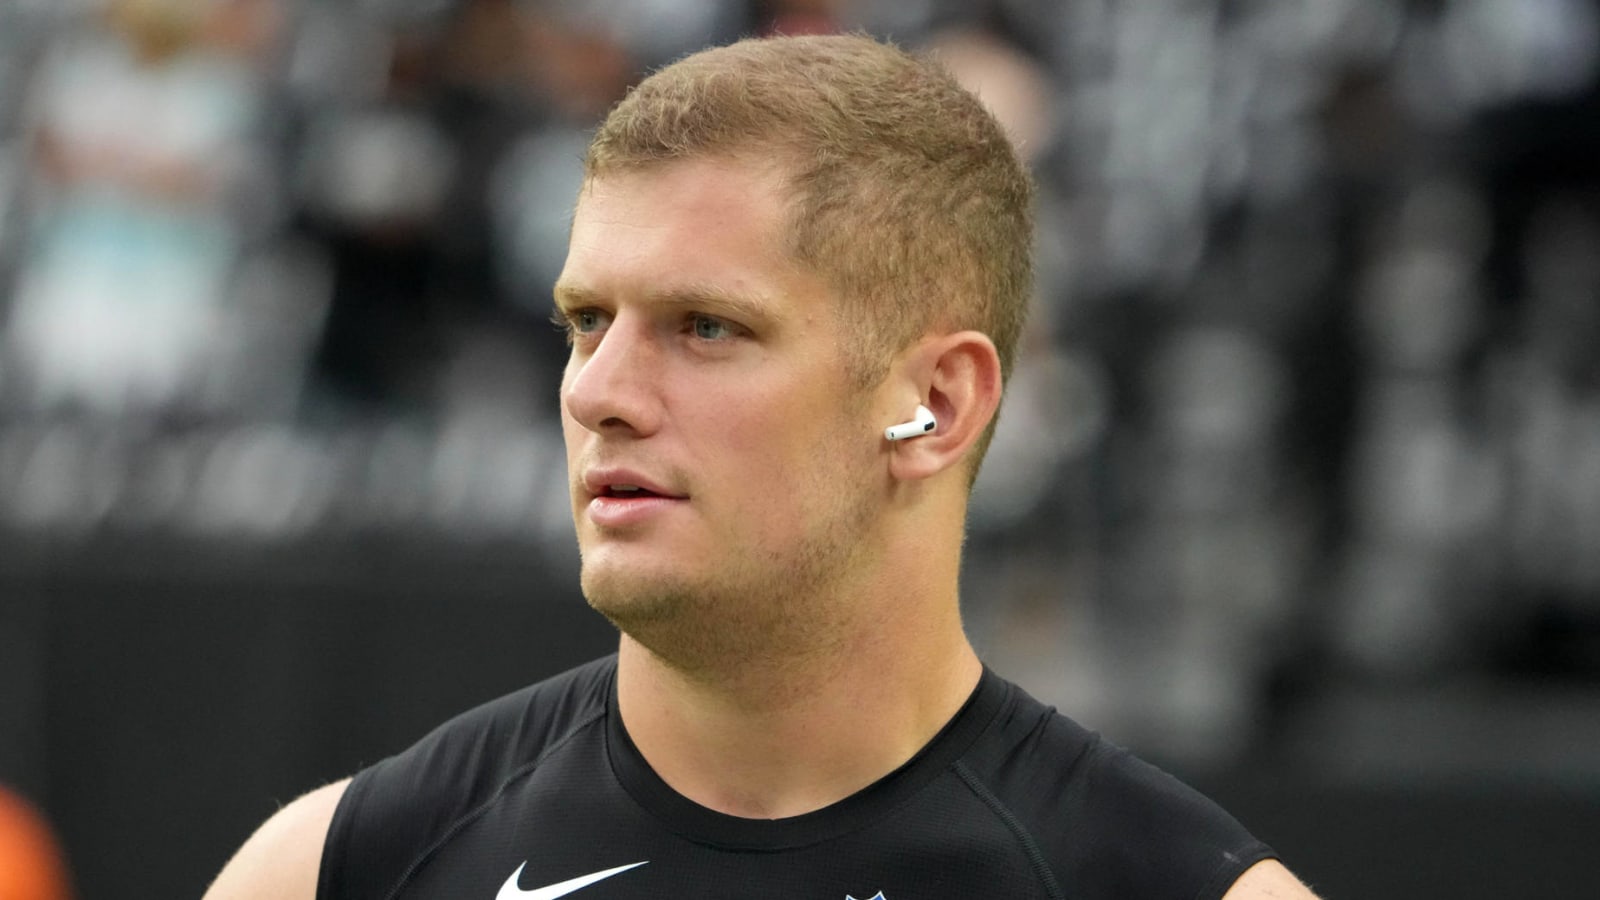 Raiders' Nassib takes 'personal day' in wake of Gruden resignation